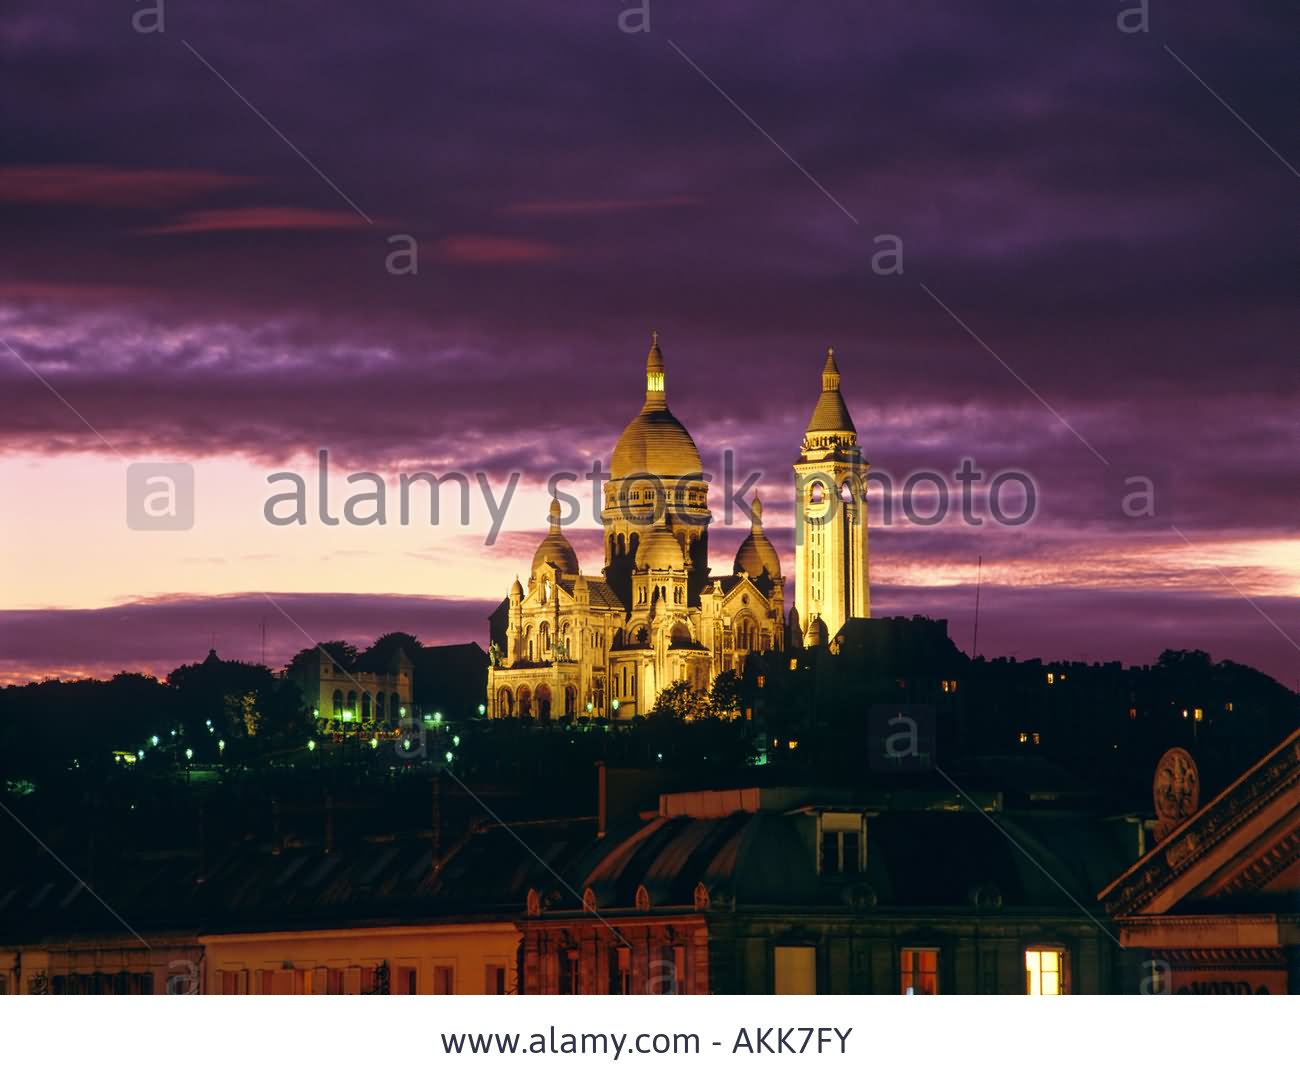 Sacre Coeur Sunset Picture